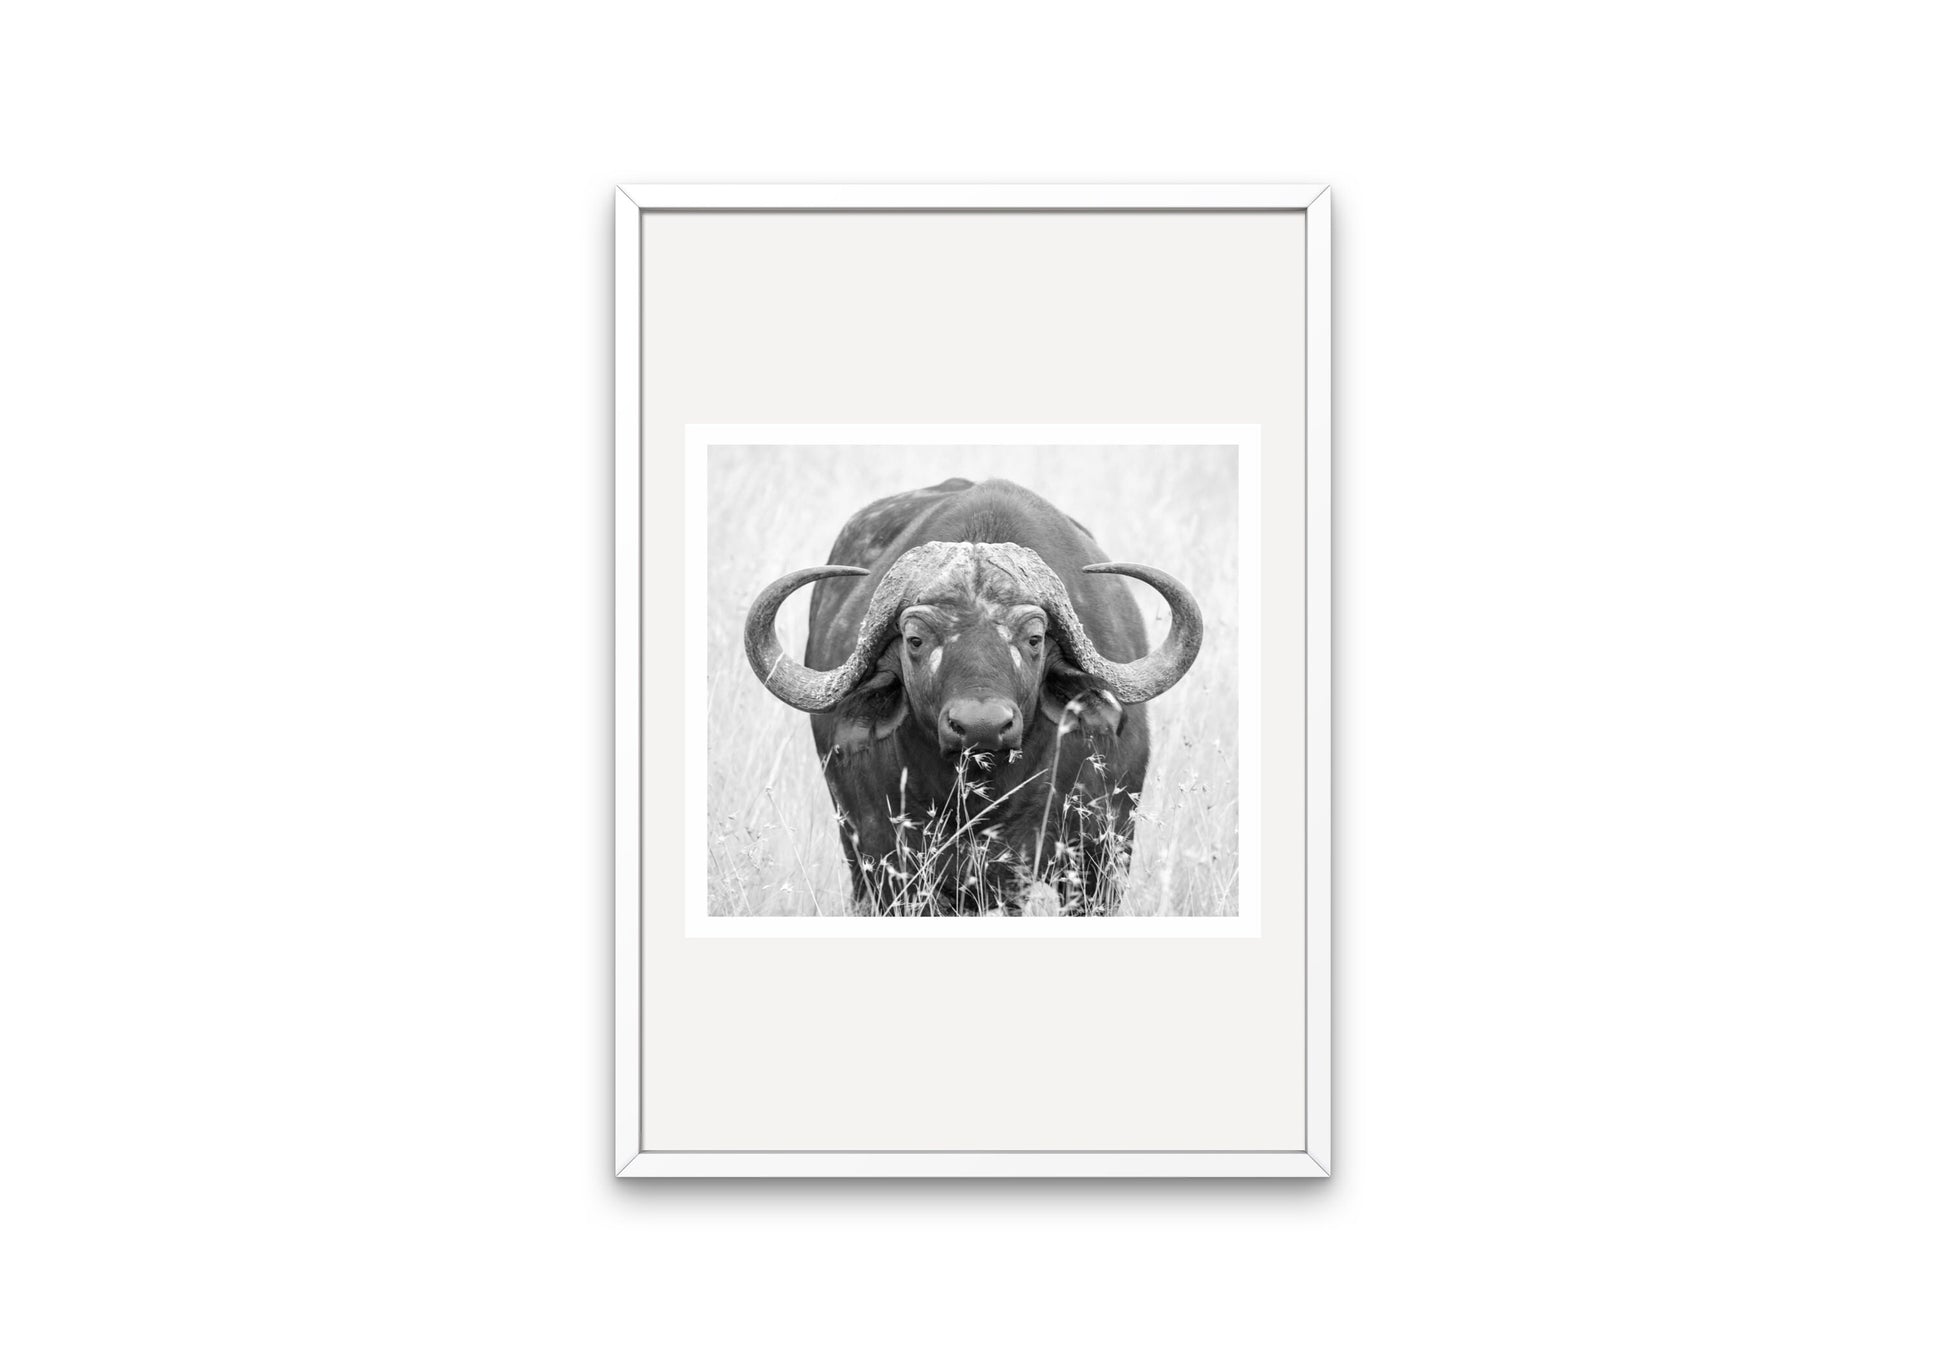 Buffalo Picture Black and White DIGITAL PRINT, American Rustic Country Art, Ranch Decor, Buffalo Photography, Country Animal Print, Western